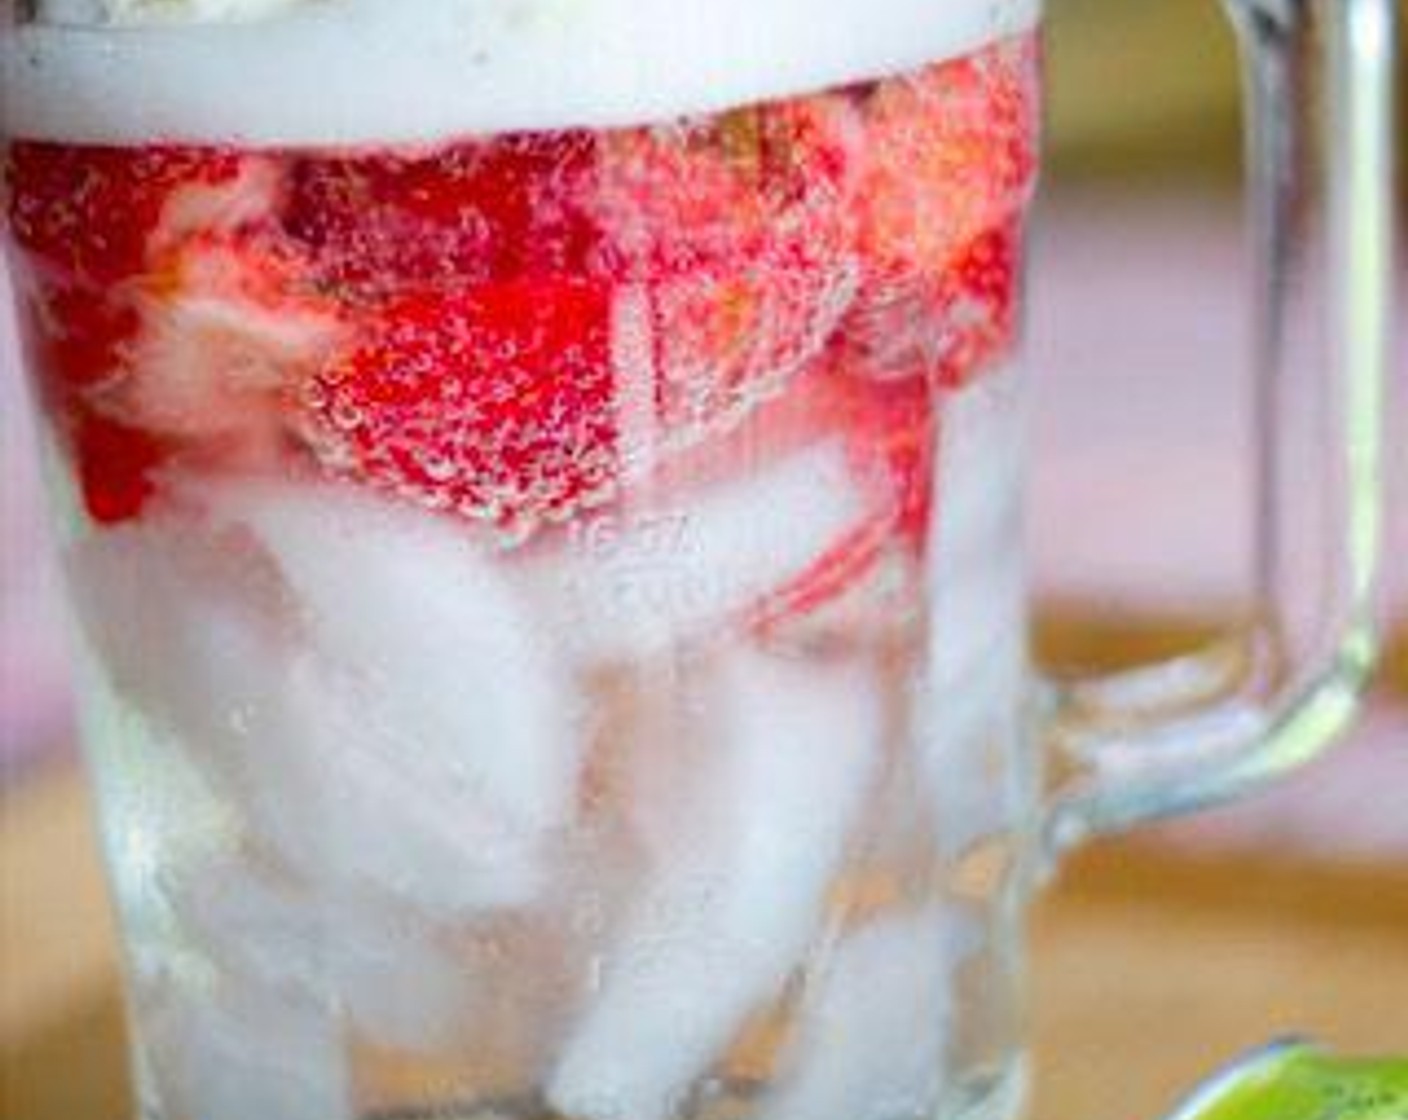 step 1 Blend 7UP® (12 fl oz), Ice (1 cup), Frozen Strawberries (1 cup), and Banana (1) until smooth, adding only half of the soft drink at first. Add more until you’ve reached your desired consistency.